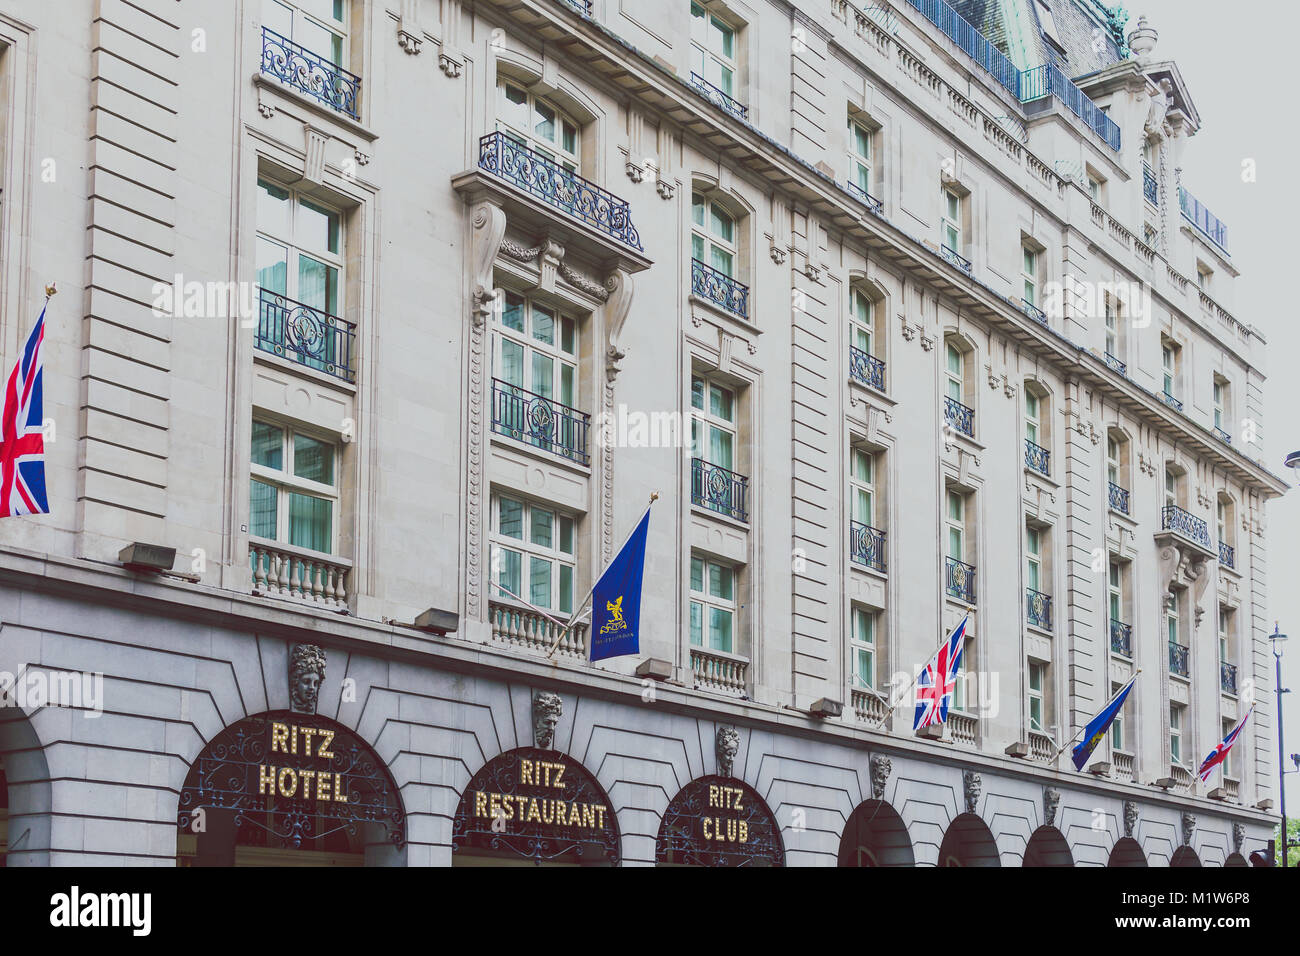 LONDON, UNITED KINGDOM - August 2nd, 2014: Exterior of the Ritz London hotel, an historical building in the city centre Stock Photo